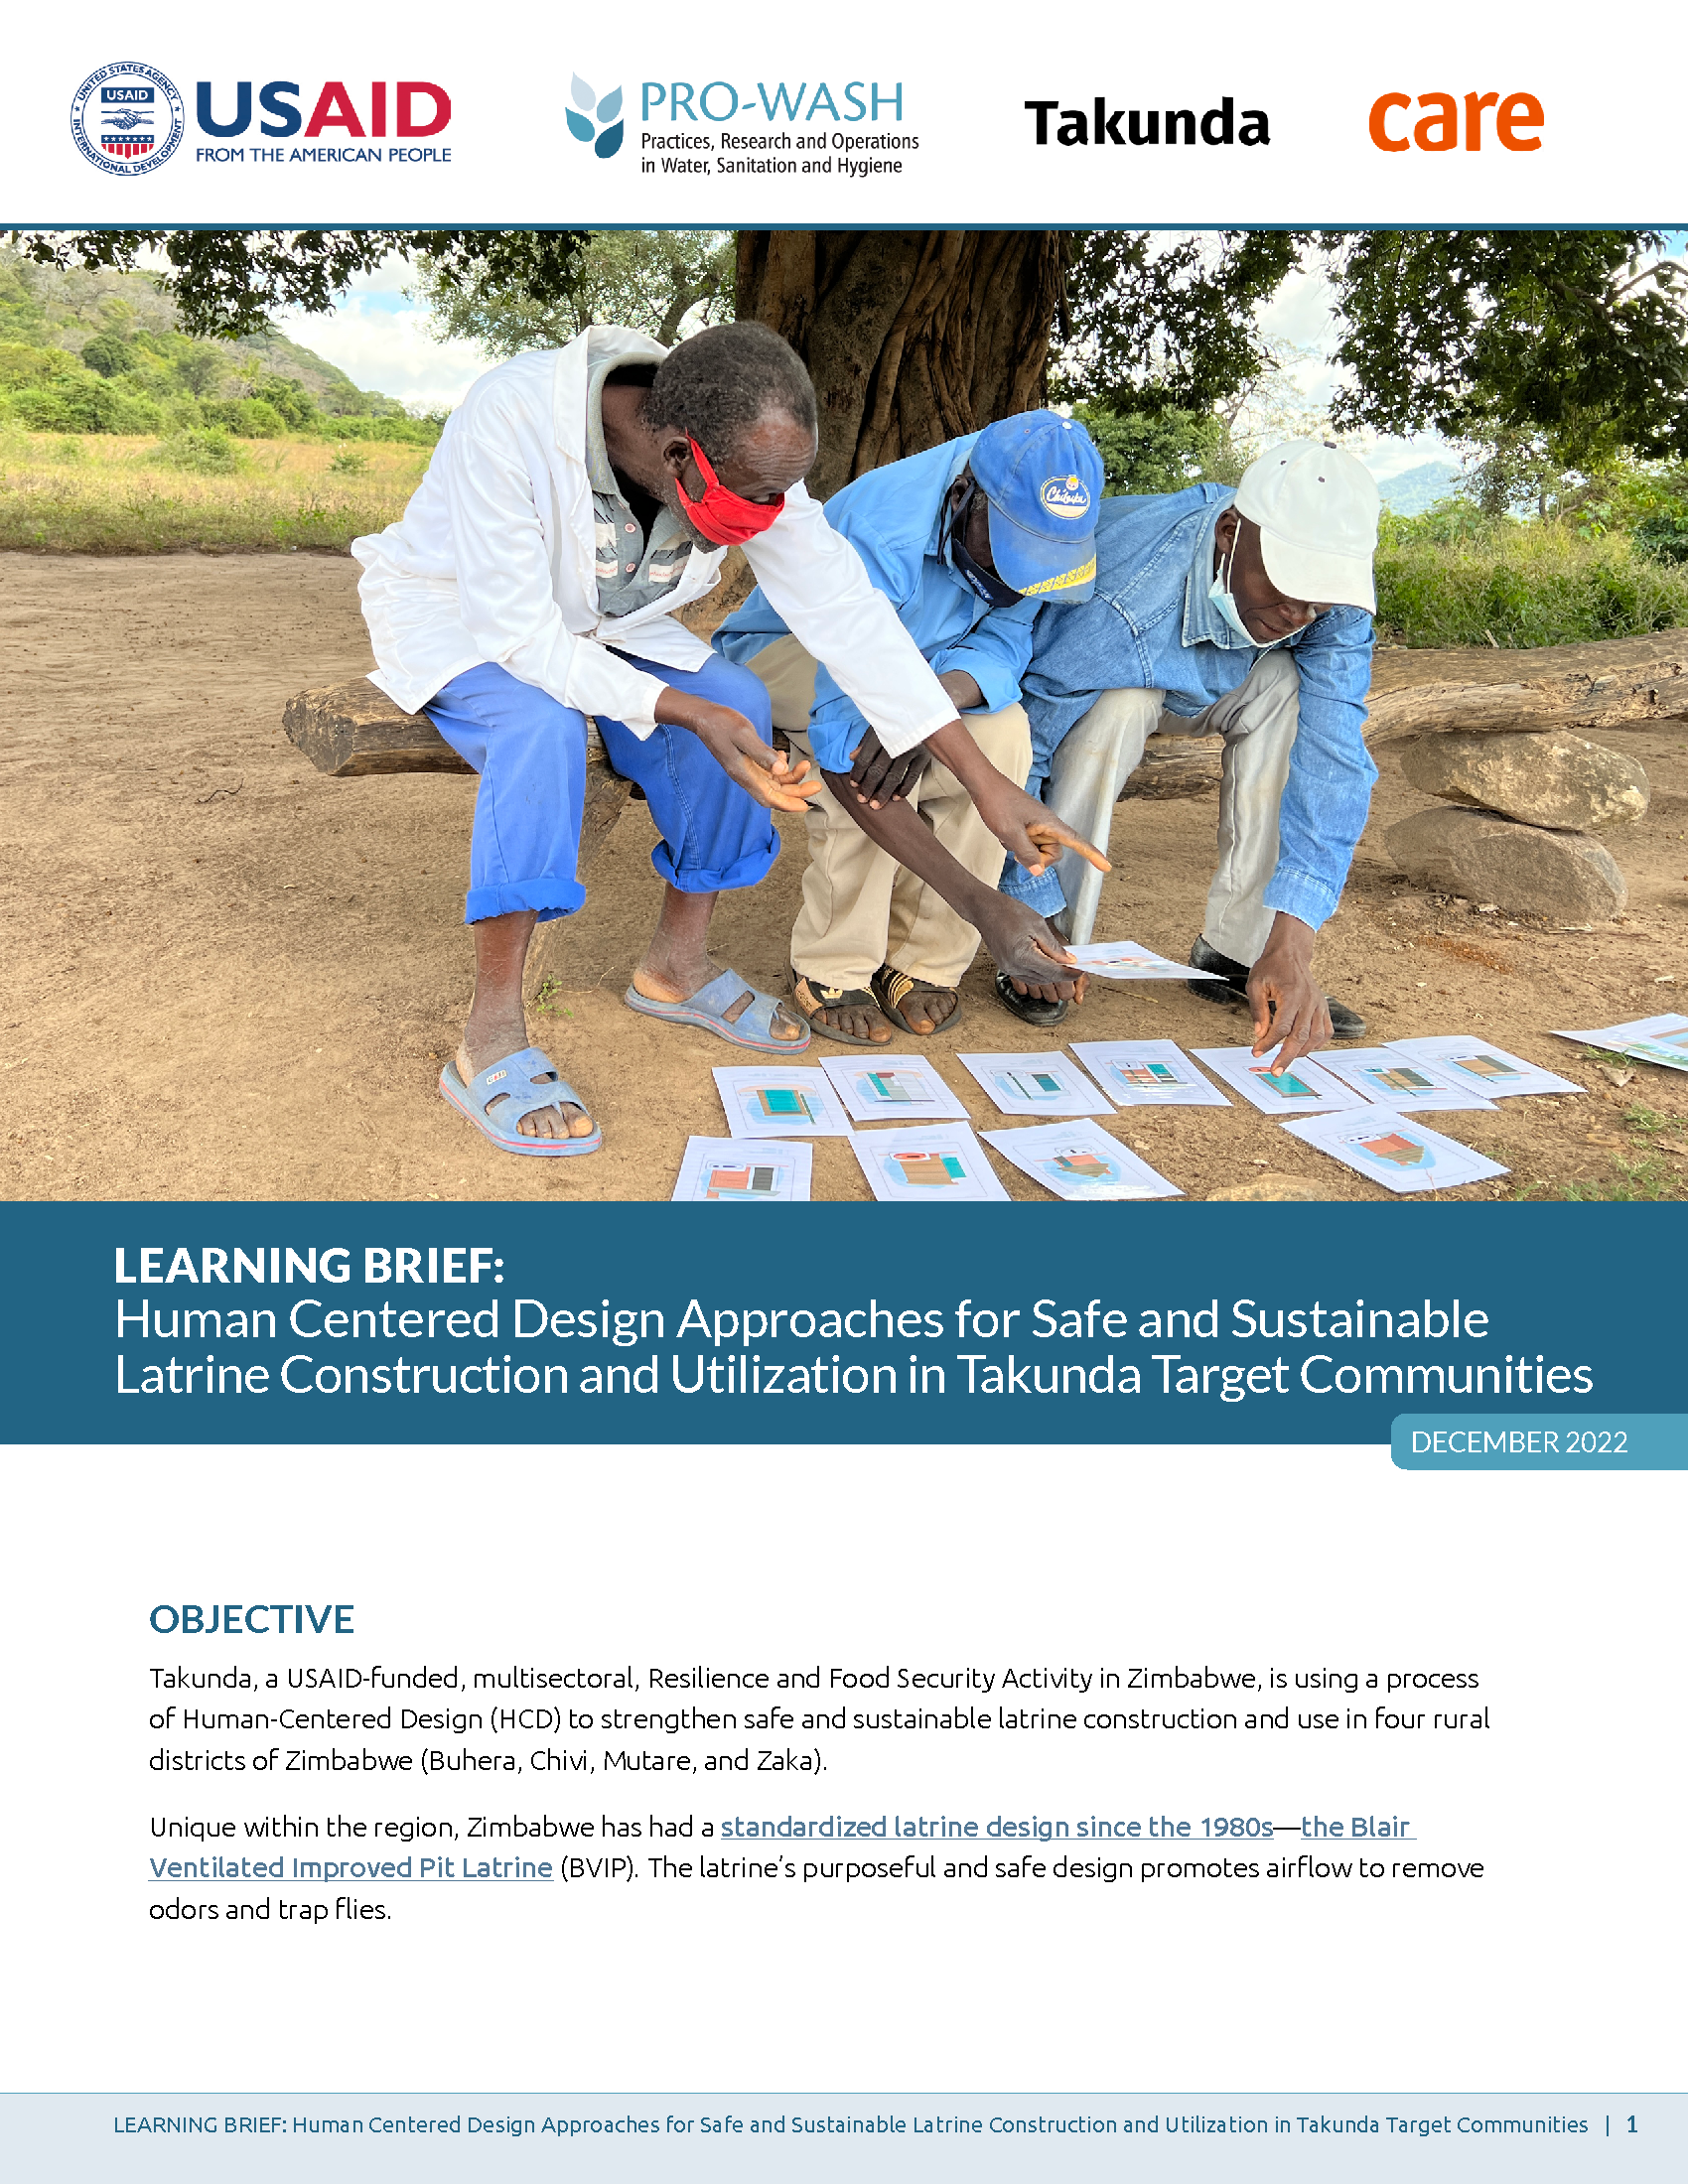 Cover page for Human Centered Design Approaches for Safe and Sustainable Latrine Construction and Utilization in Takunda Target Communities